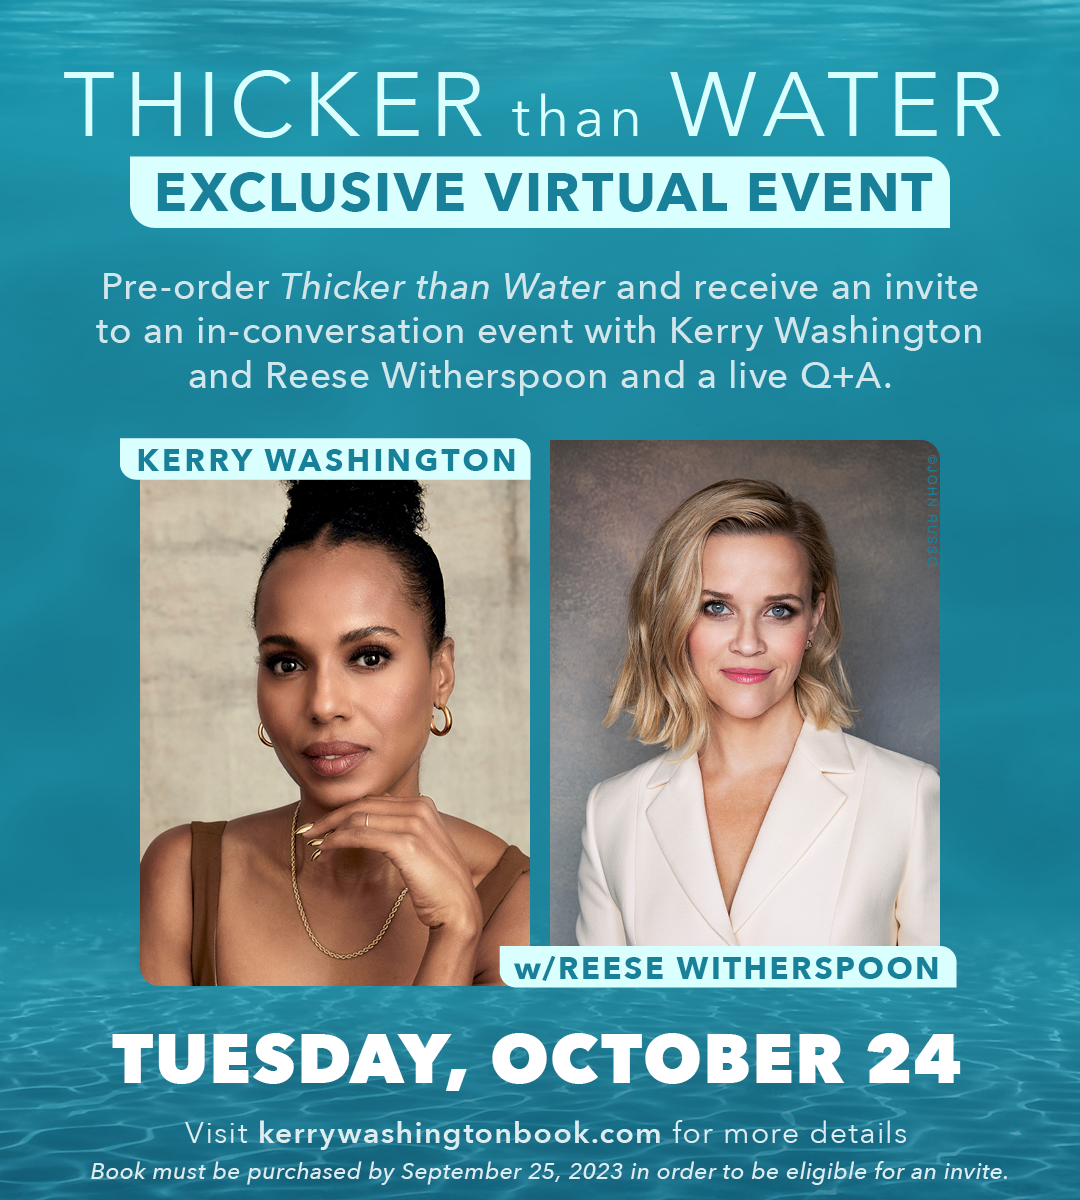 Thicker than Water pre-order competition